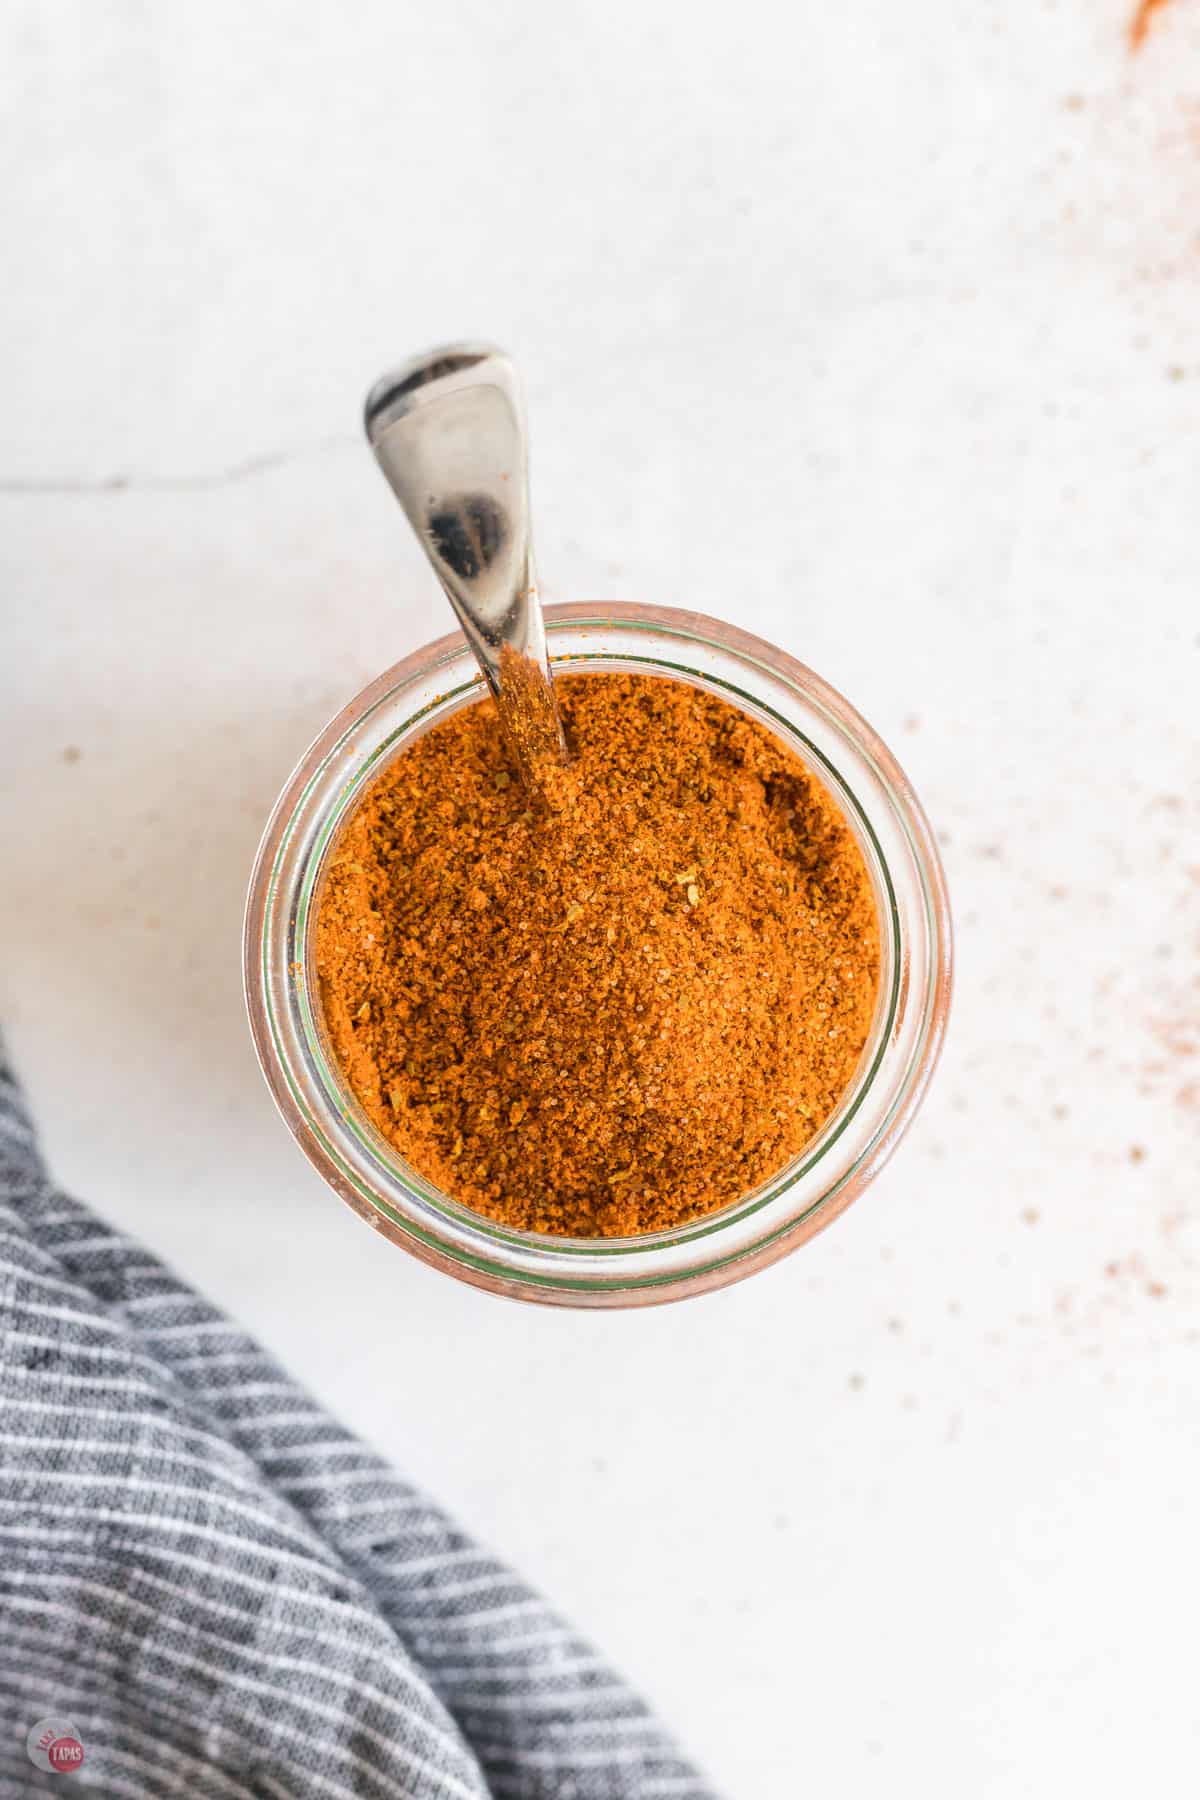 What's Really In Old Bay Seasoning?